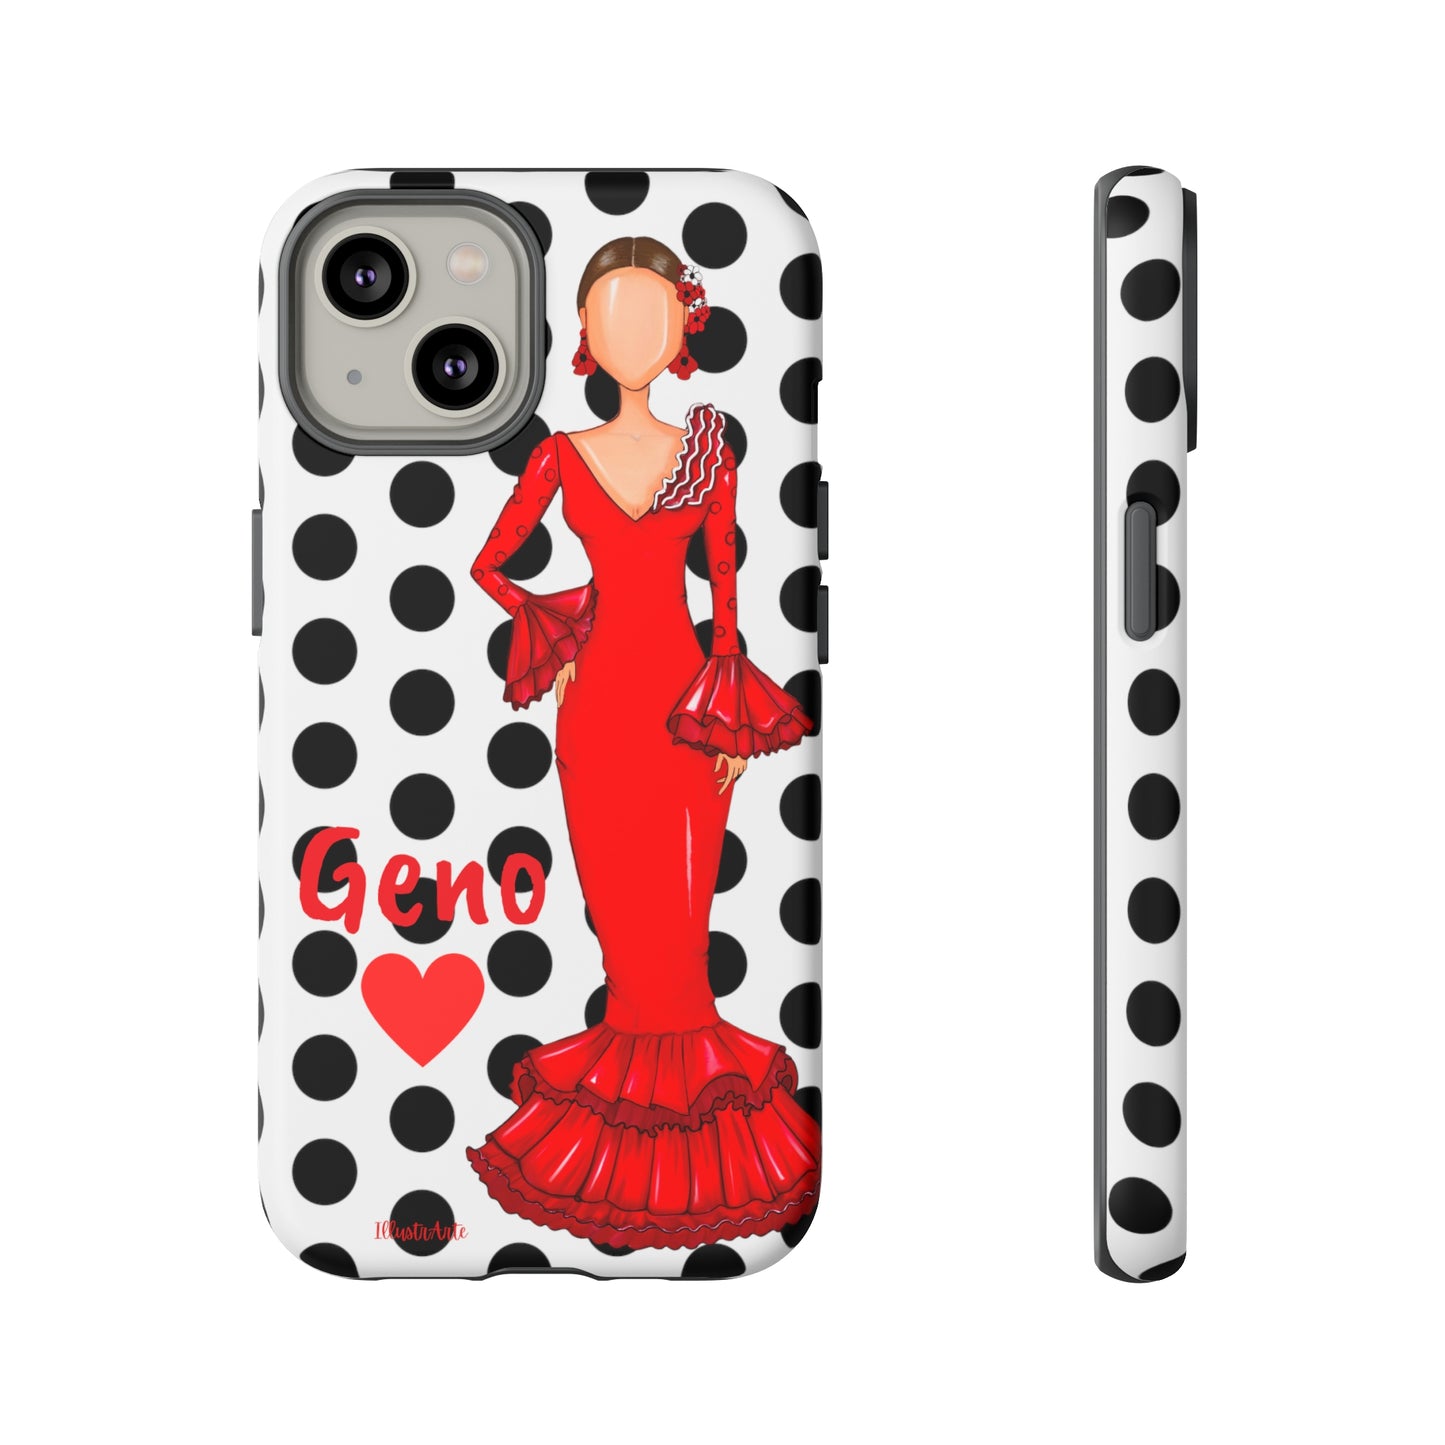 a polka dot phone case with a woman in a red dress